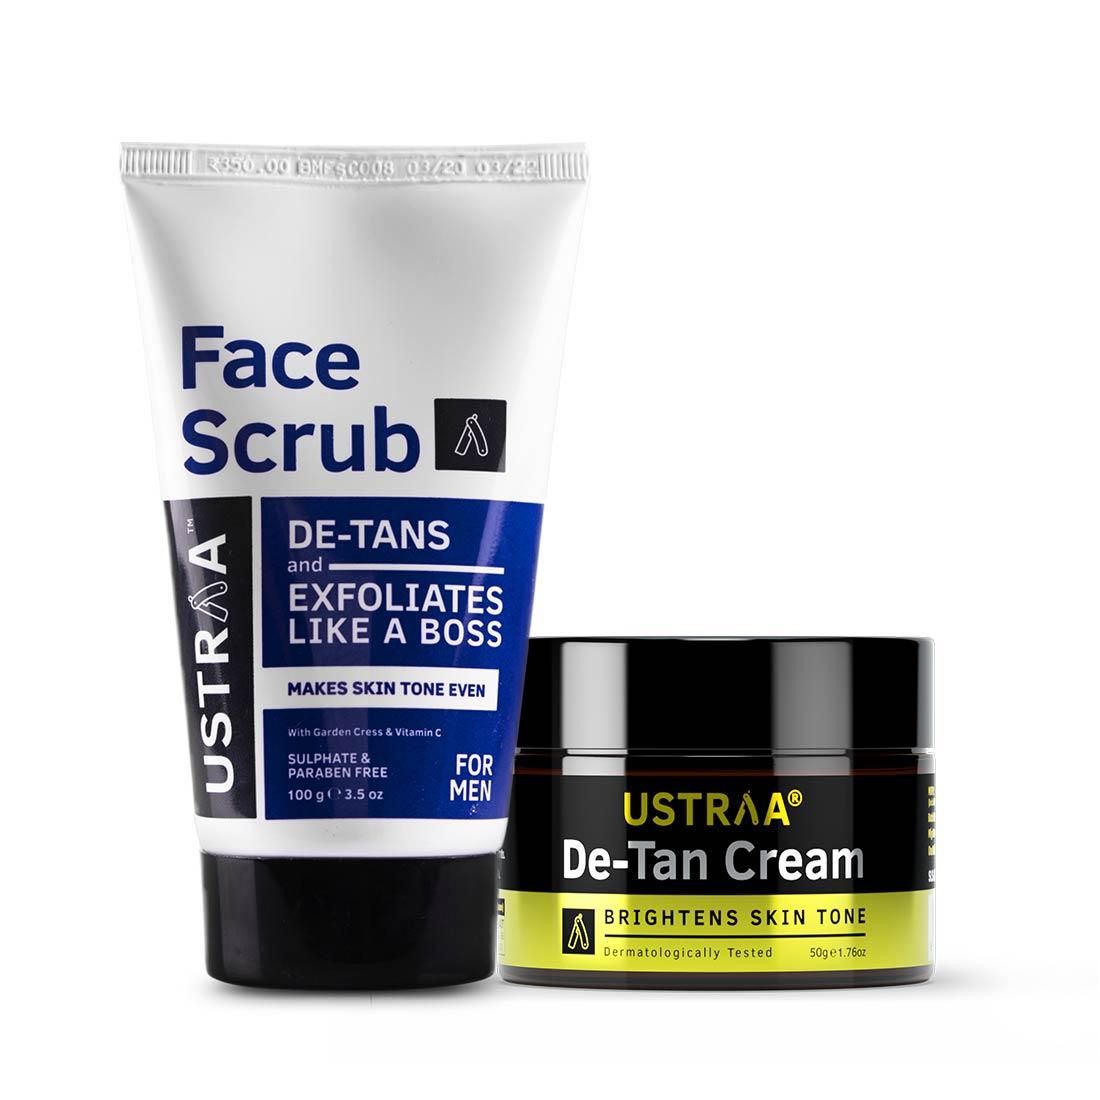 Ustraa Skin Brightening De-Tan Kit for Complete Care of Tan Removal with De-Tan Cream and Face Scrub for Men